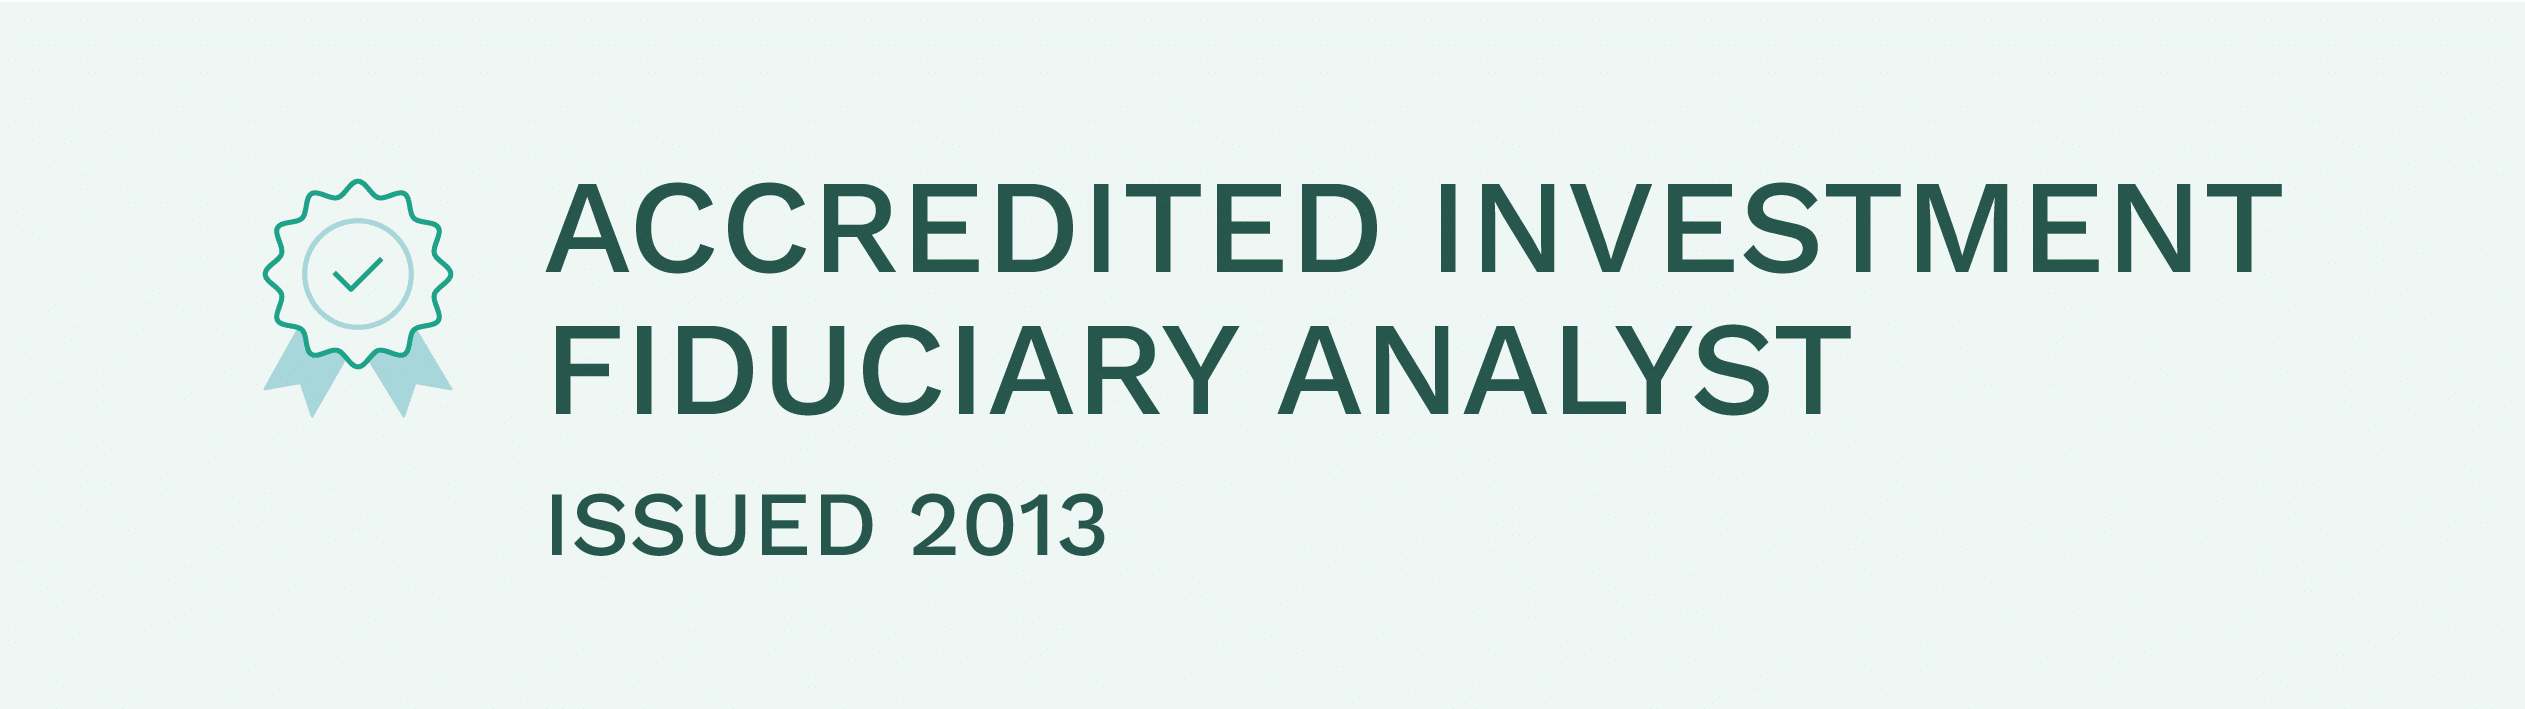 Accredited Investment Fiduciary Analyst 2013